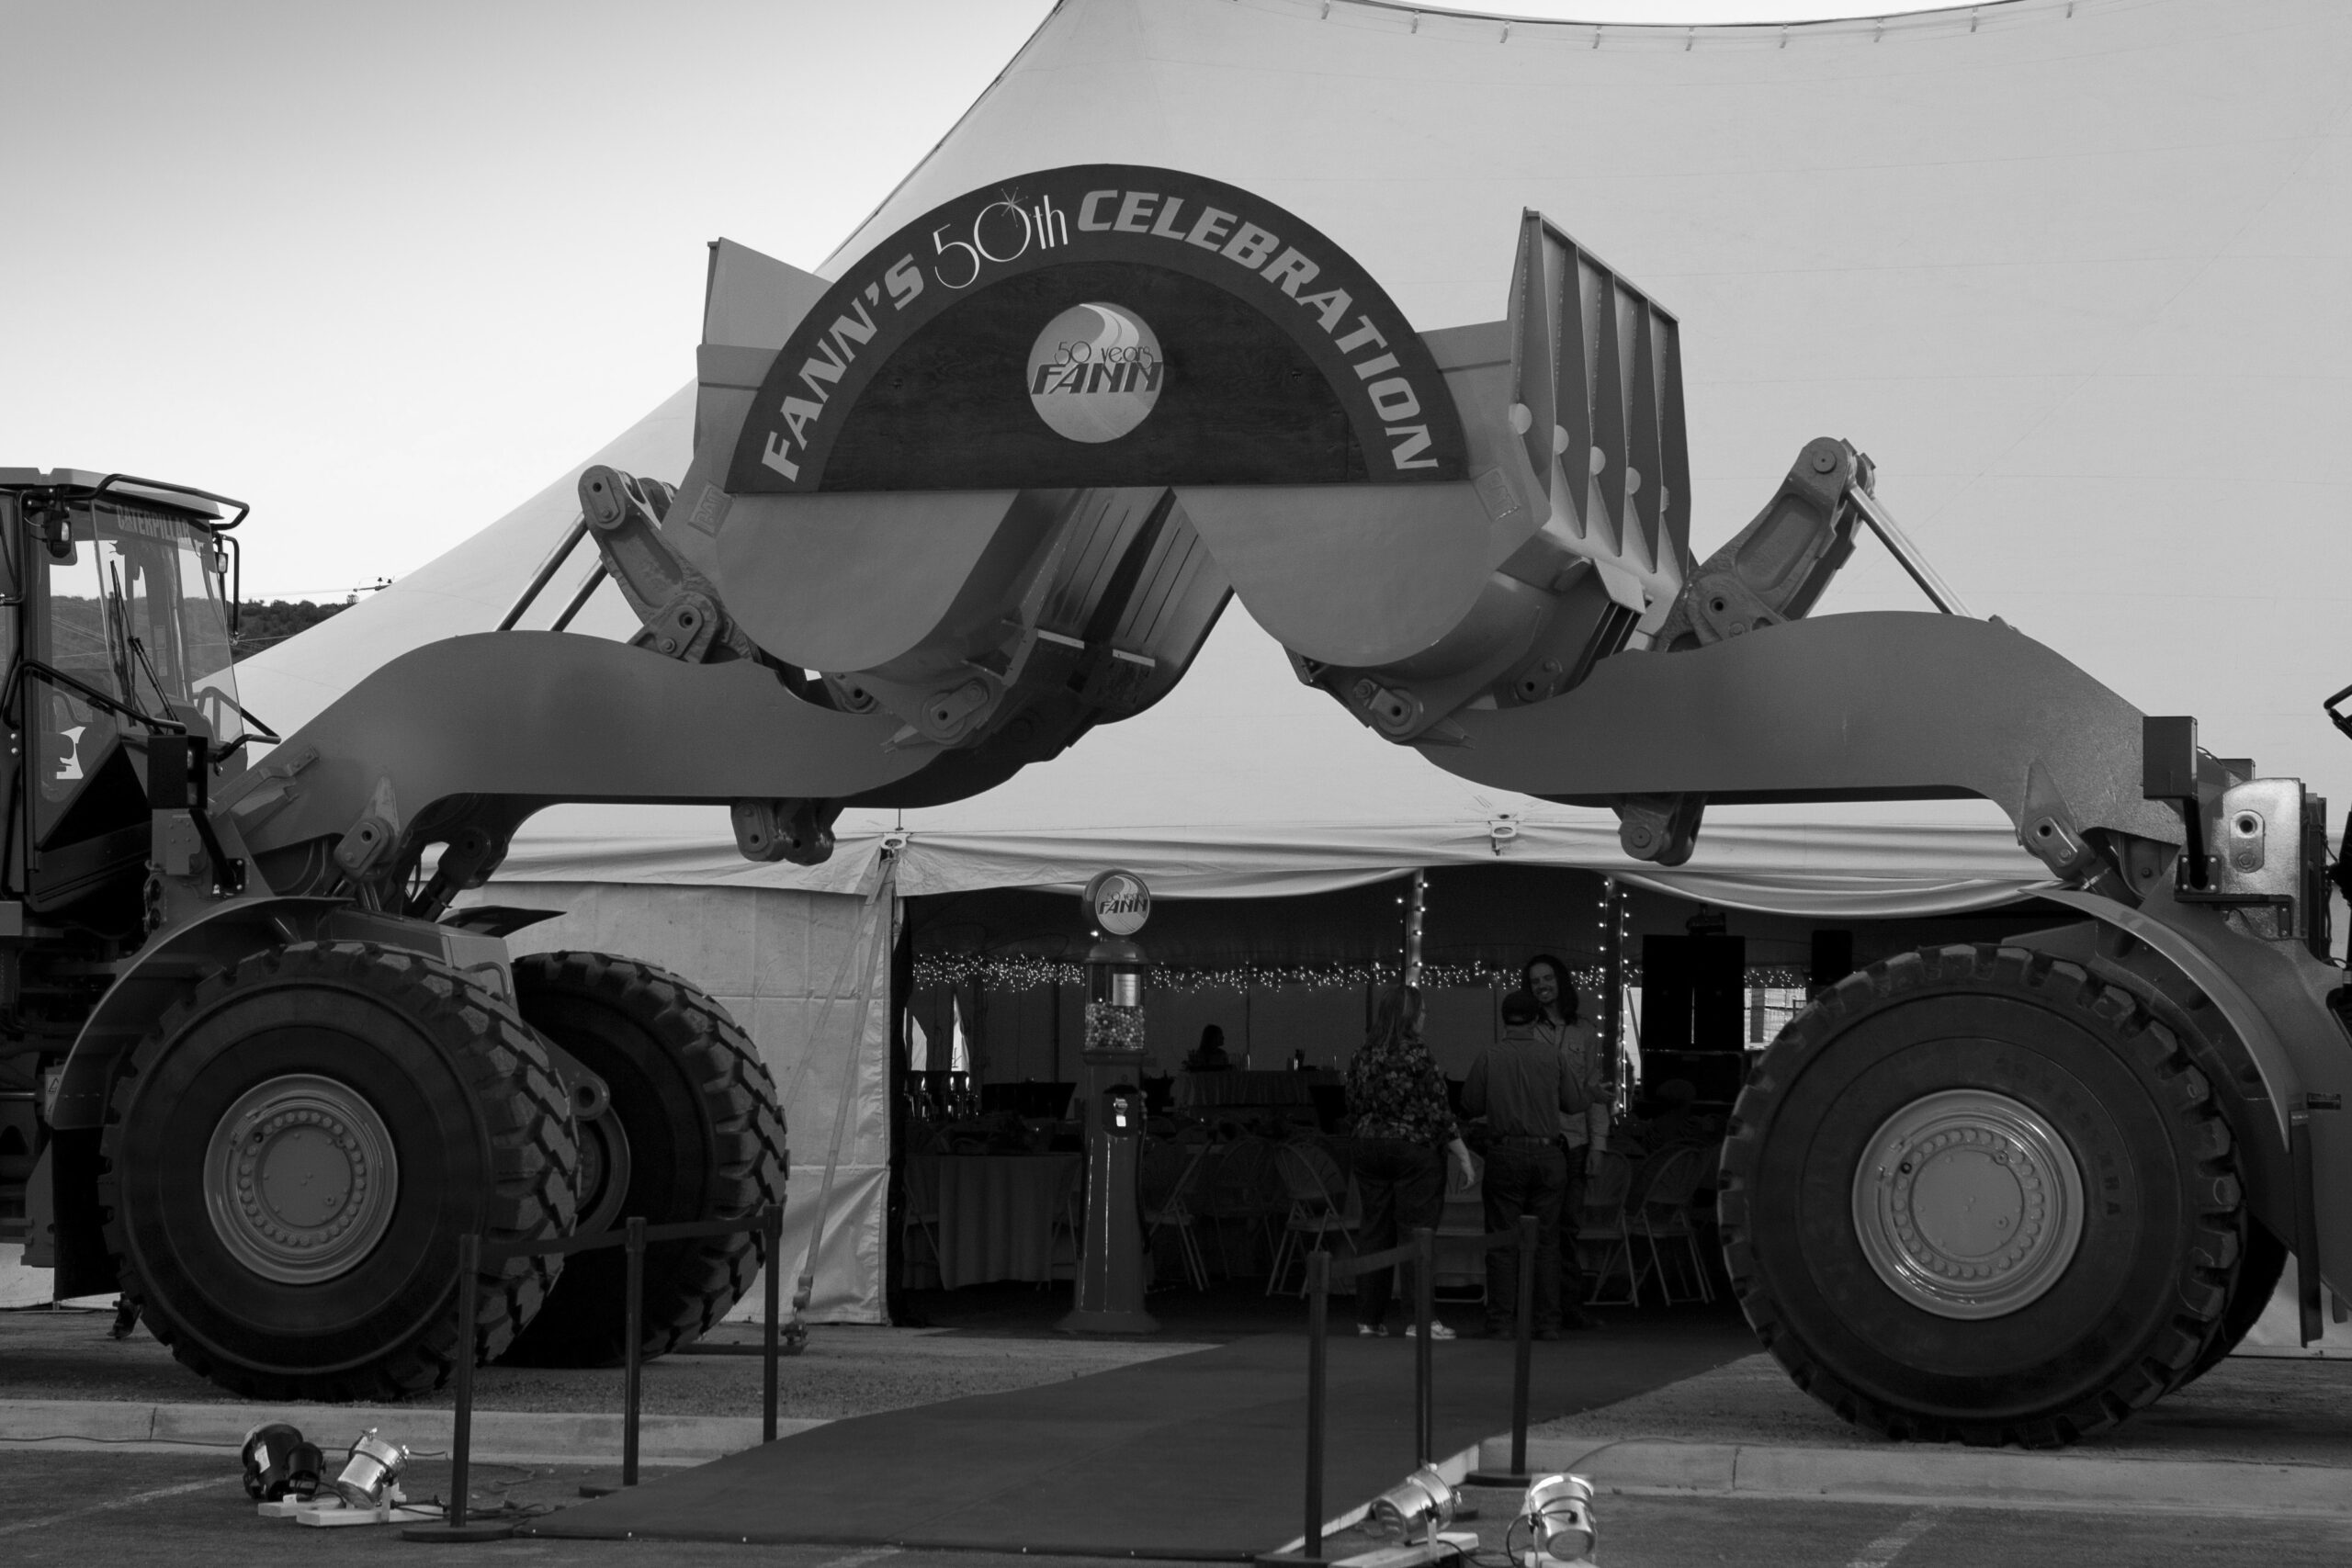 A black and white photo of a large tractor in front of a tent, pertaining to Fann Contracting.